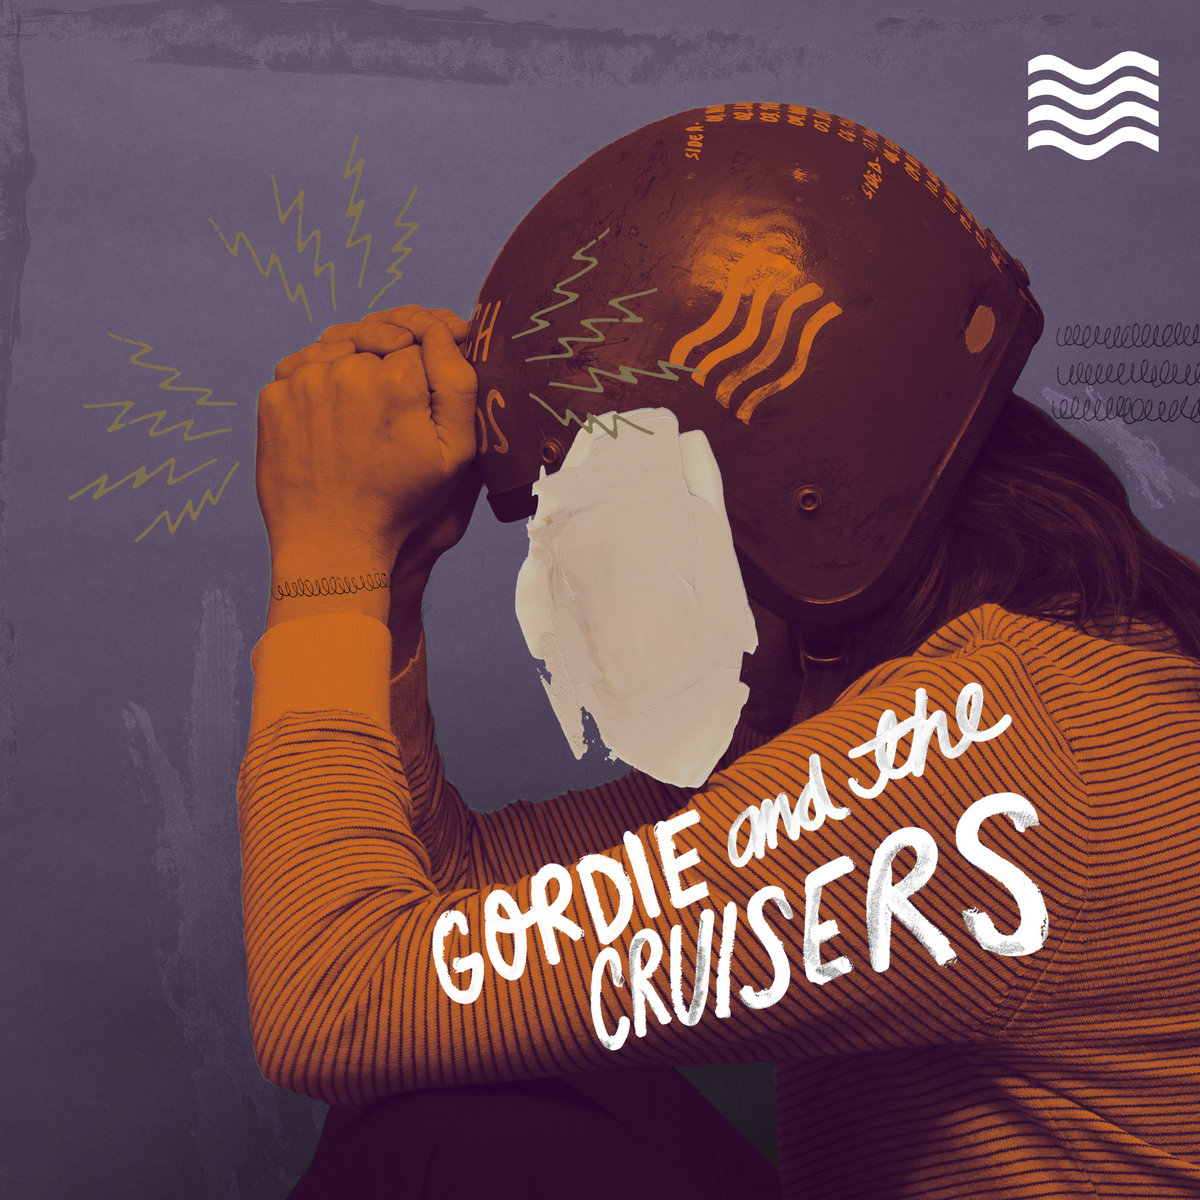 Artwork for 'Gordie and the Cruisers' by Touch the Clouds